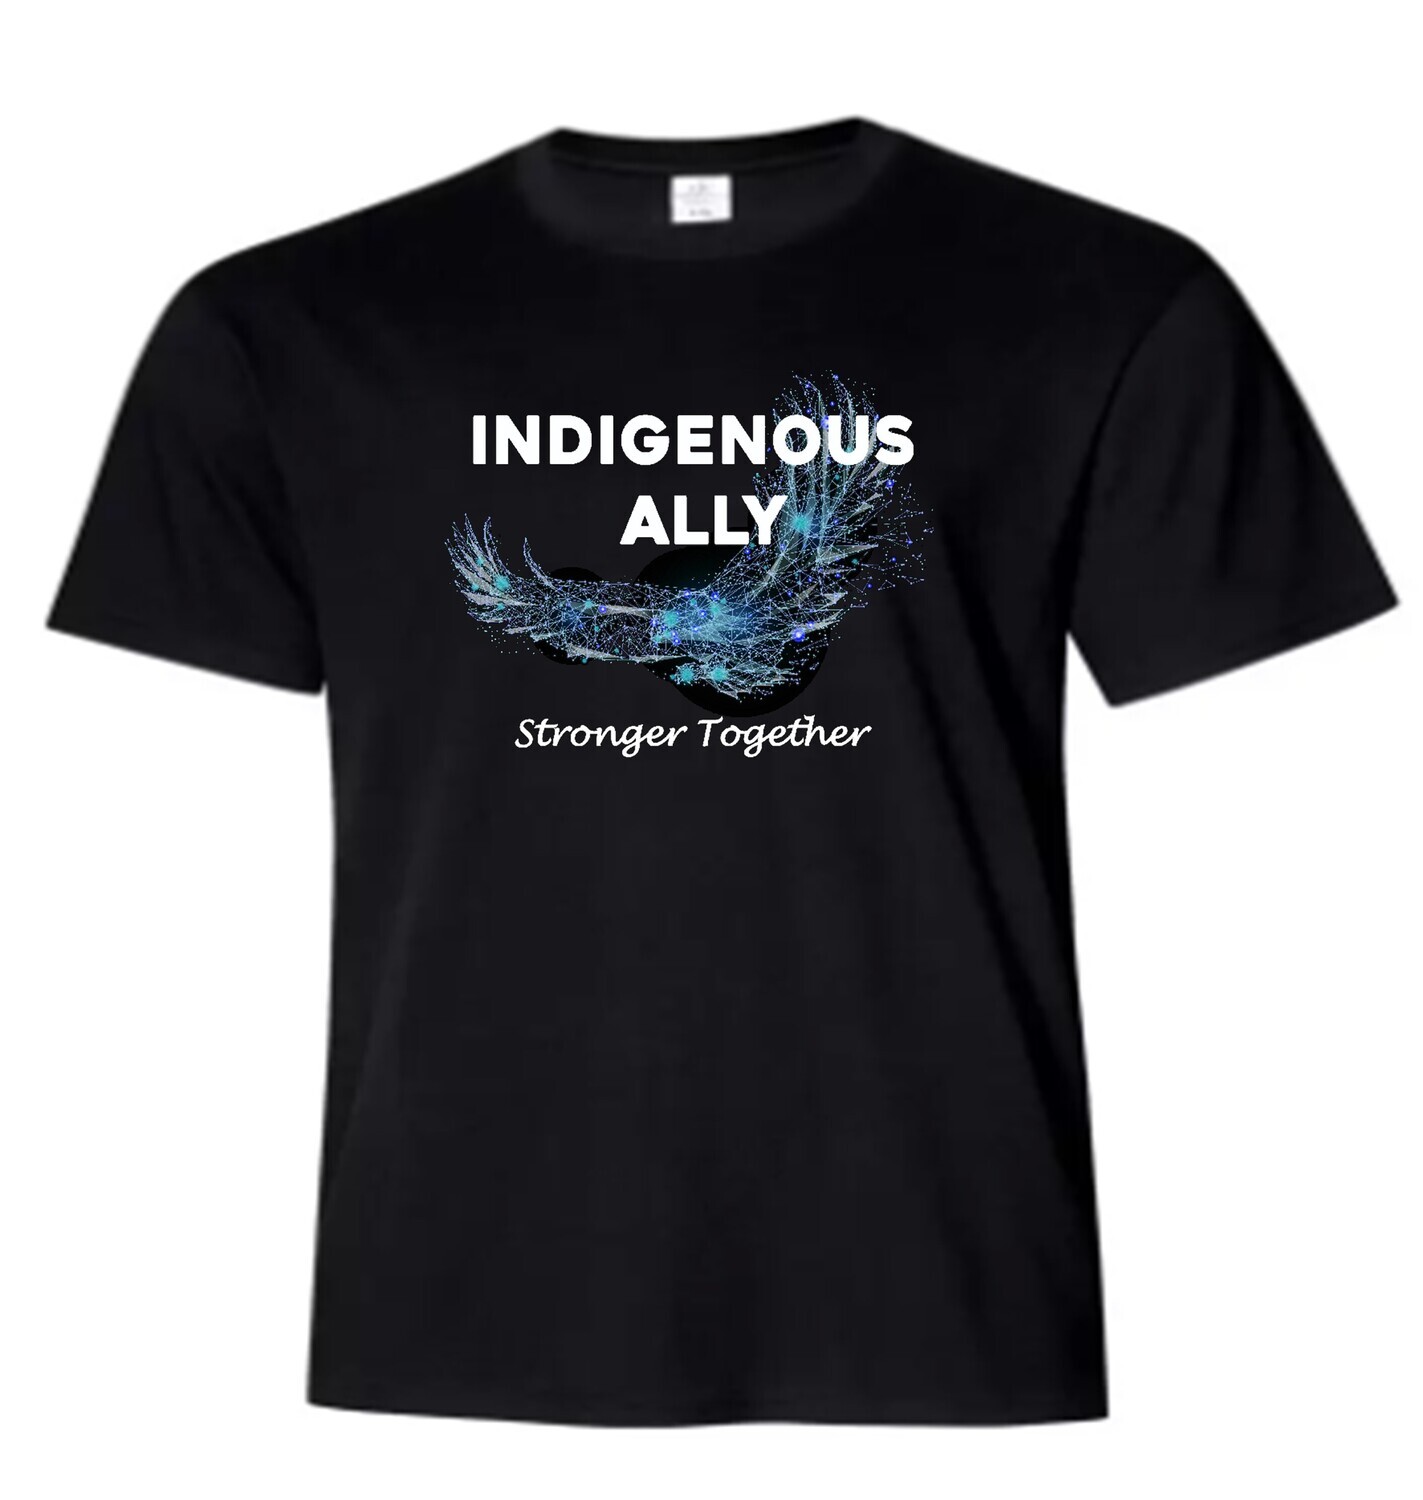 Indigenous Ally - Stronger Together